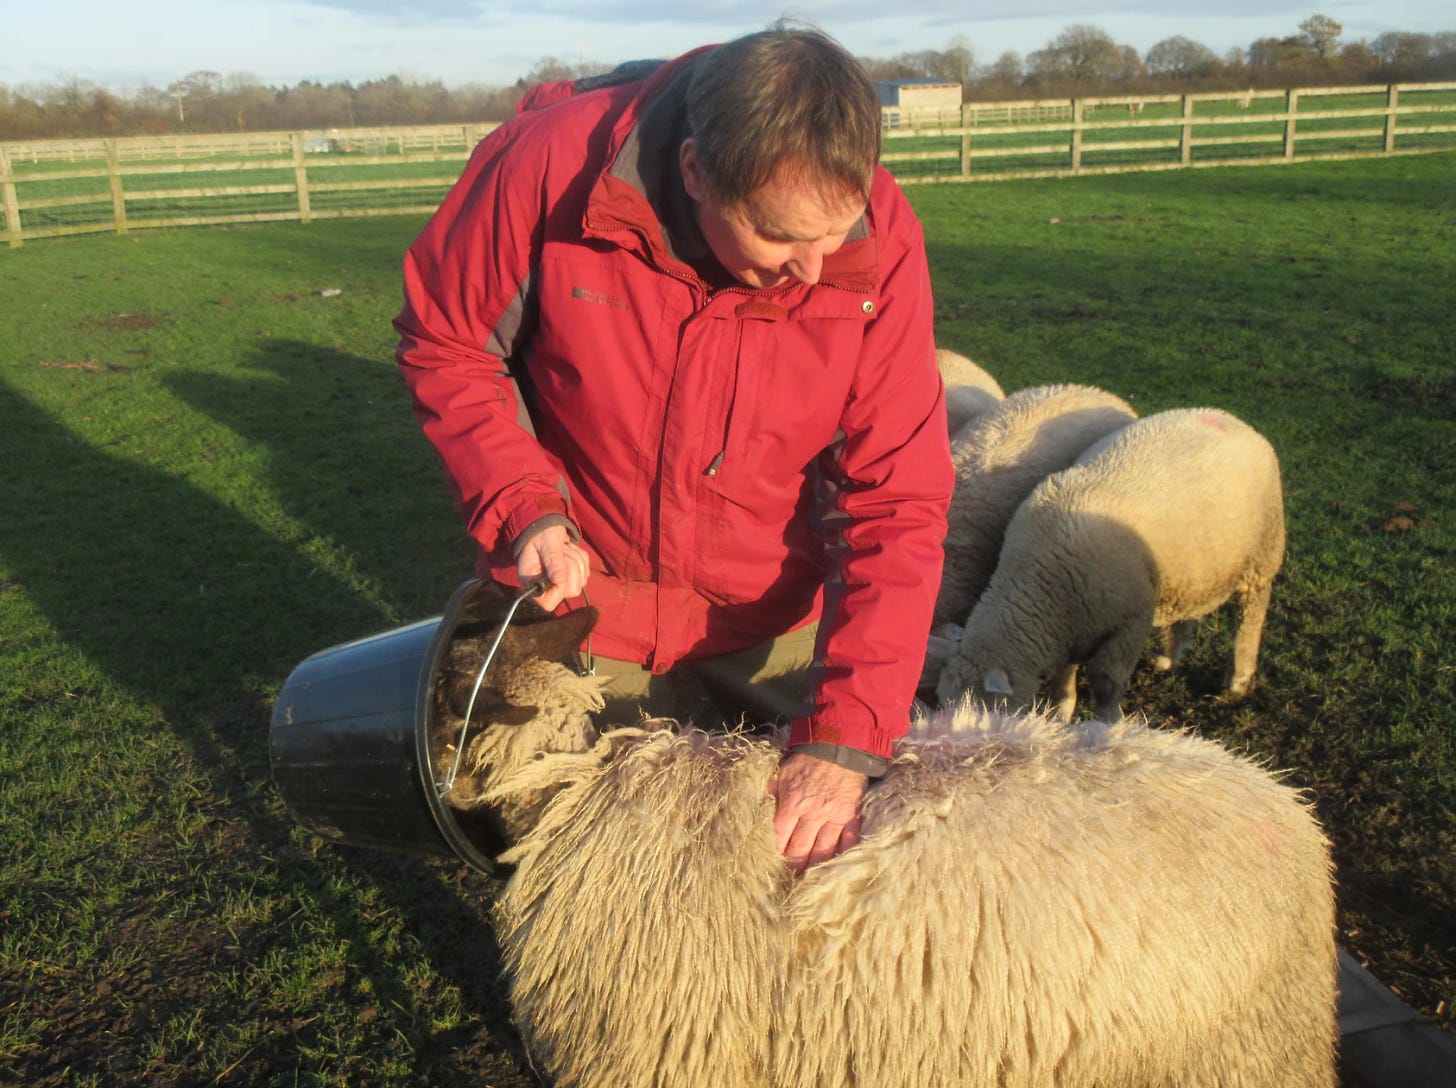 My dad, in a red coat, feeds a sheep on a farm that specialises in working with those suffering from dementia.